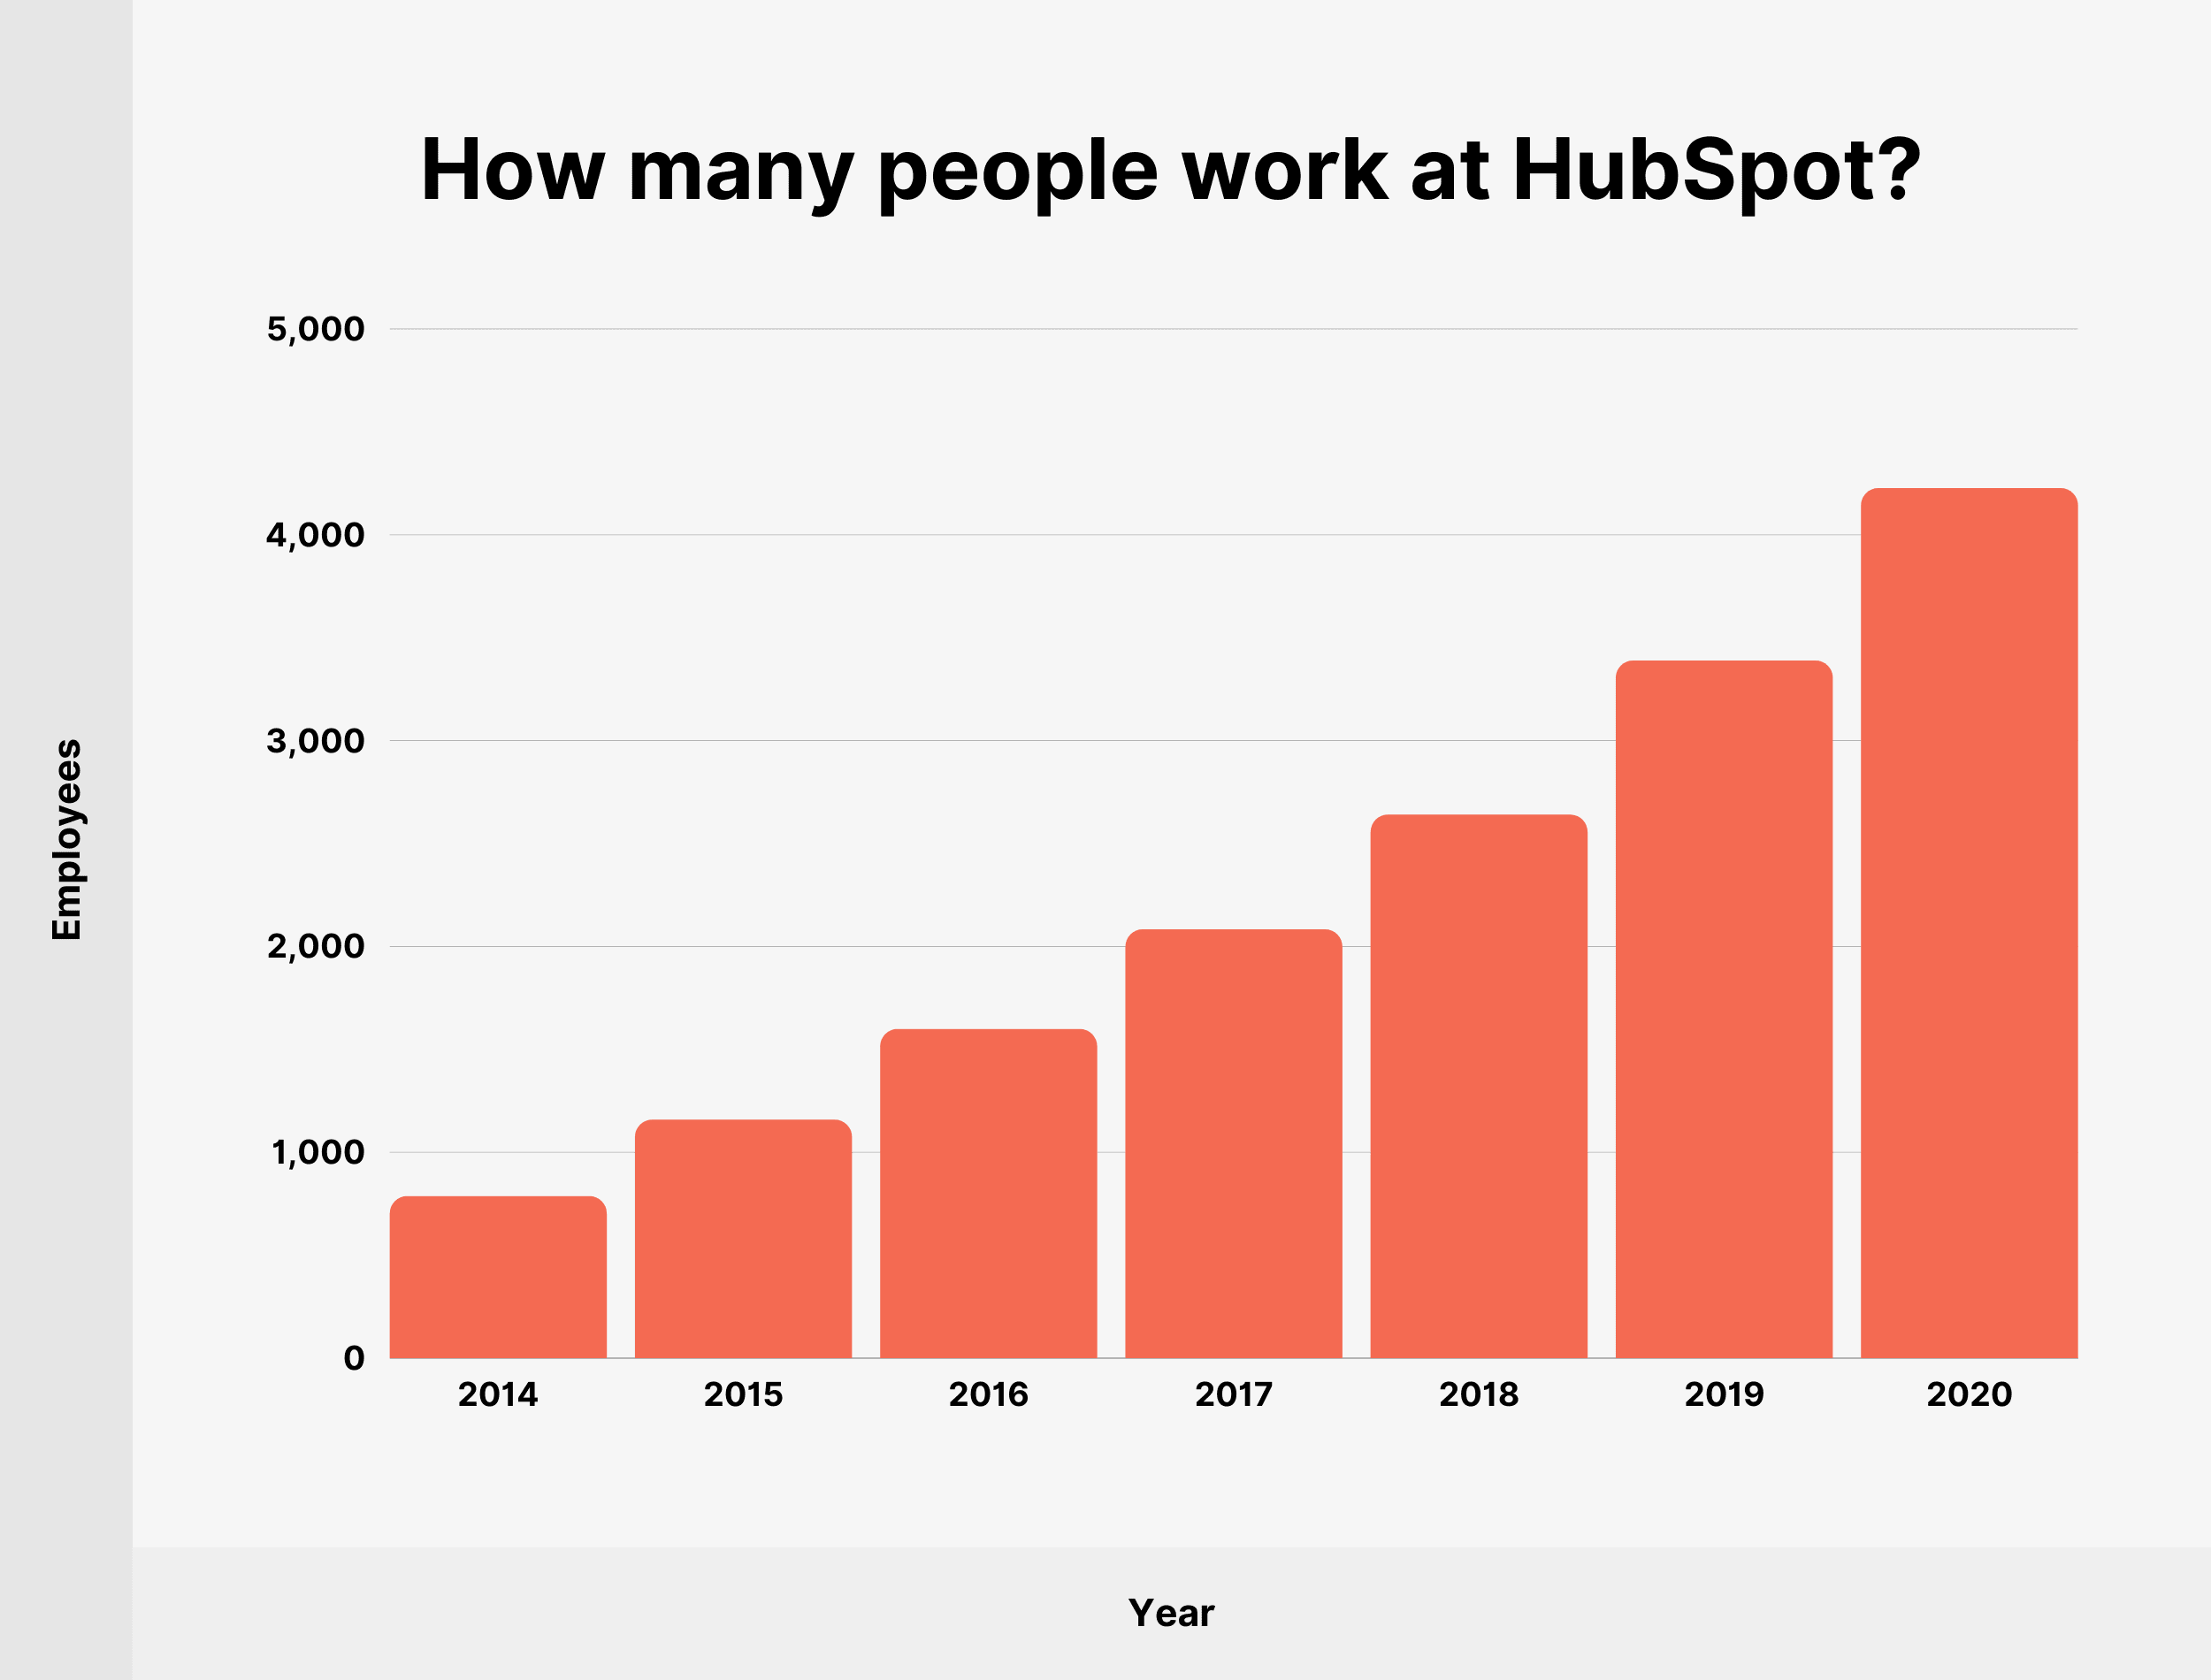 How many people work at HubSpot?